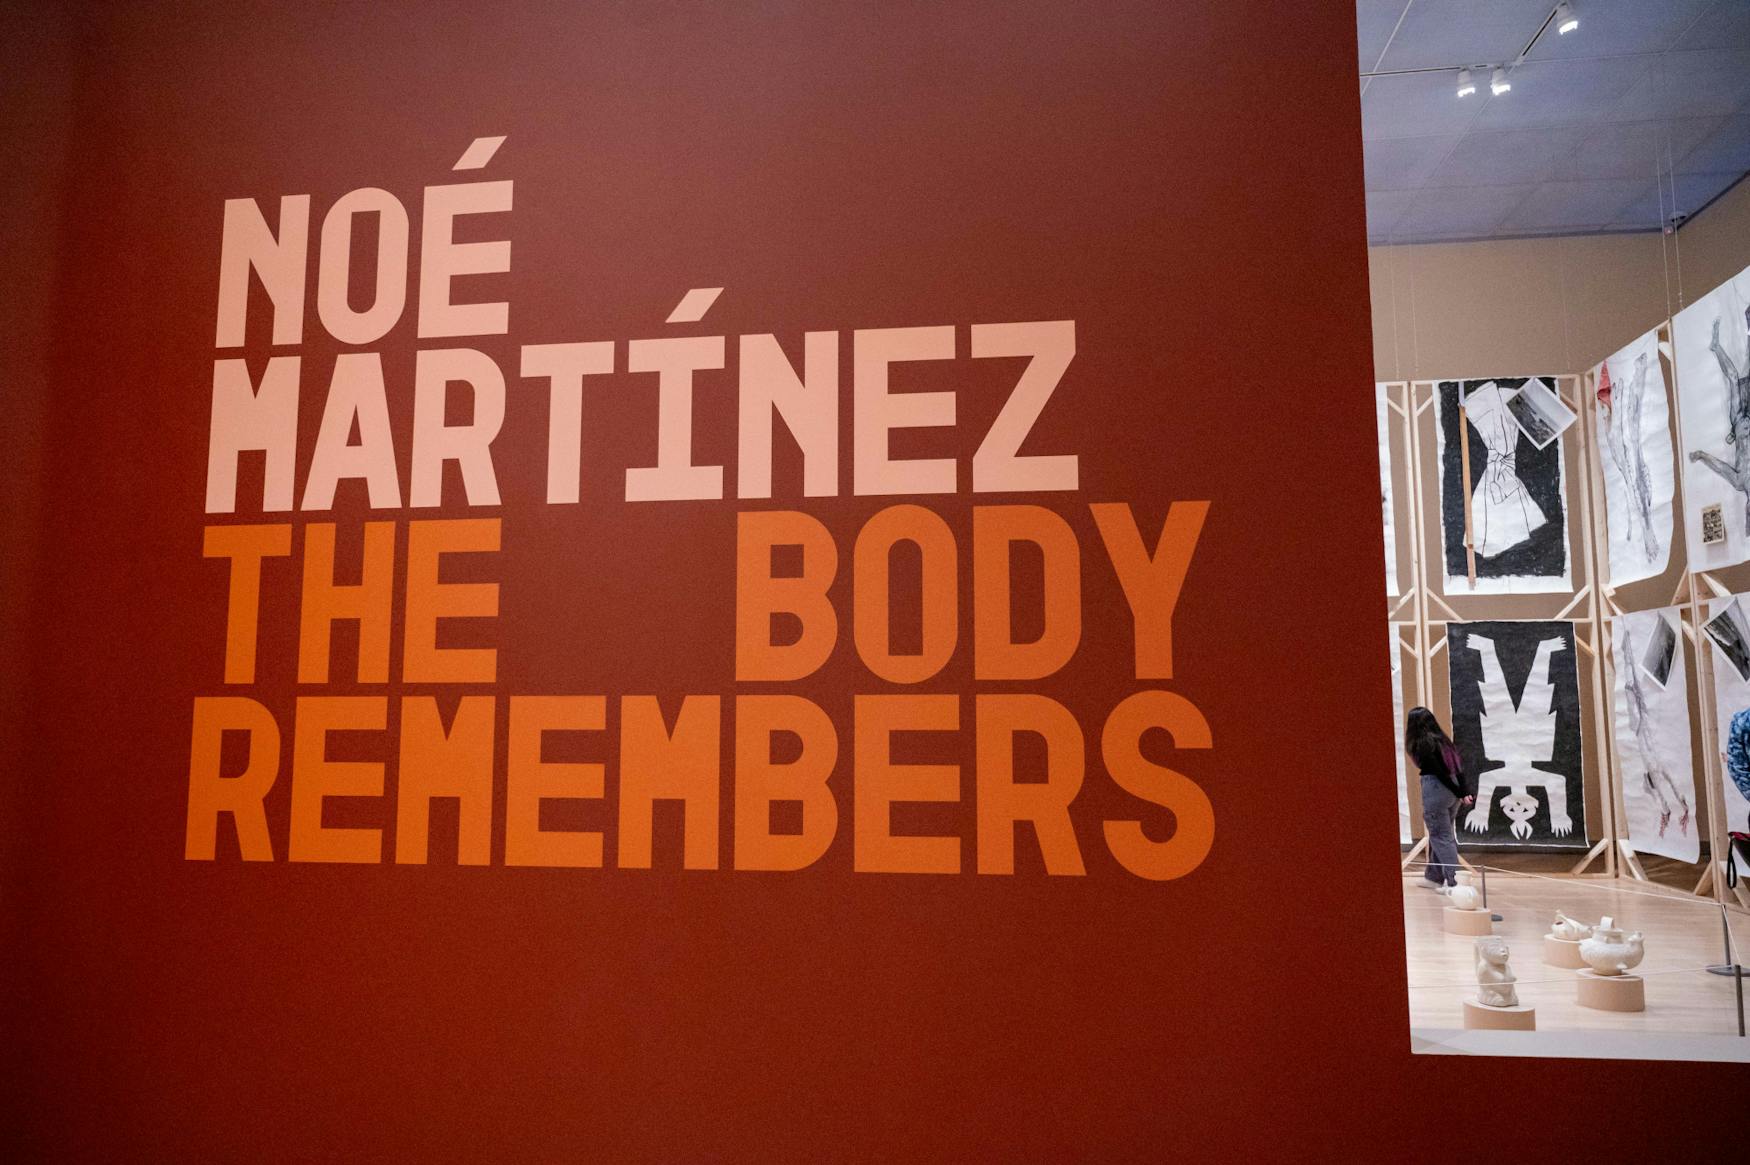 "The Body Remembers"